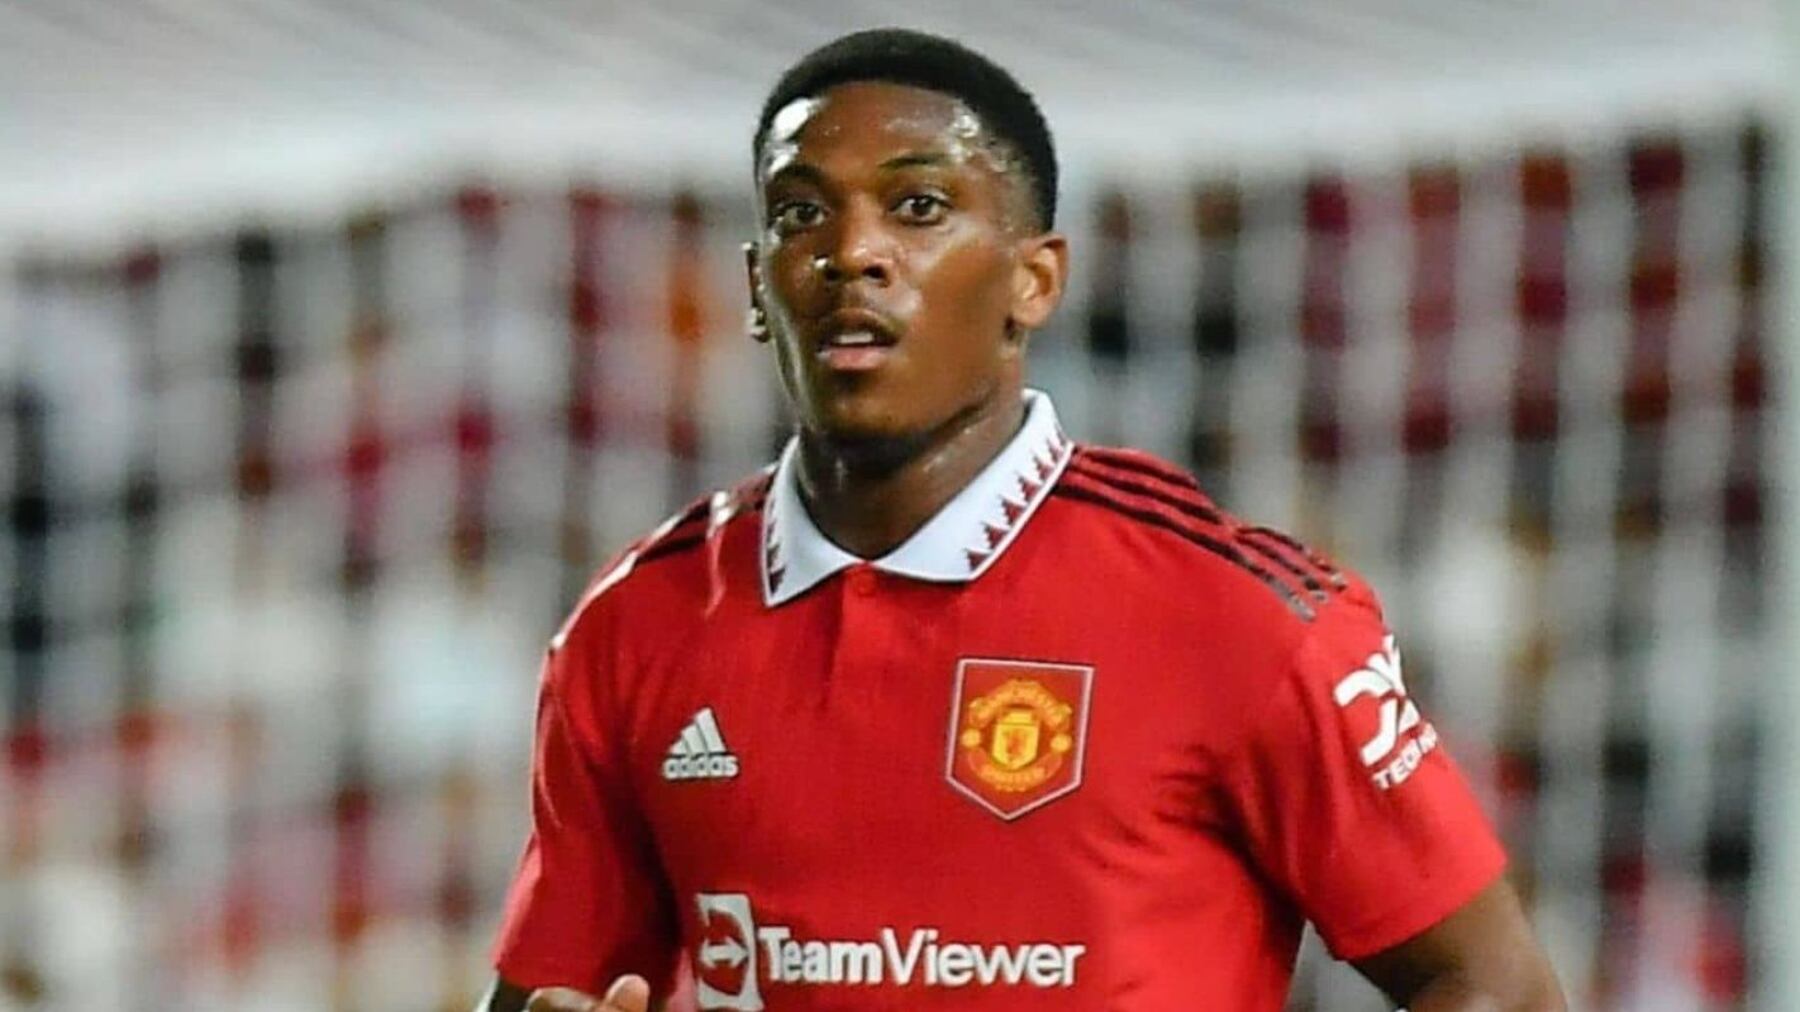 The hard message from the fans for Martial, what will the striker do now?